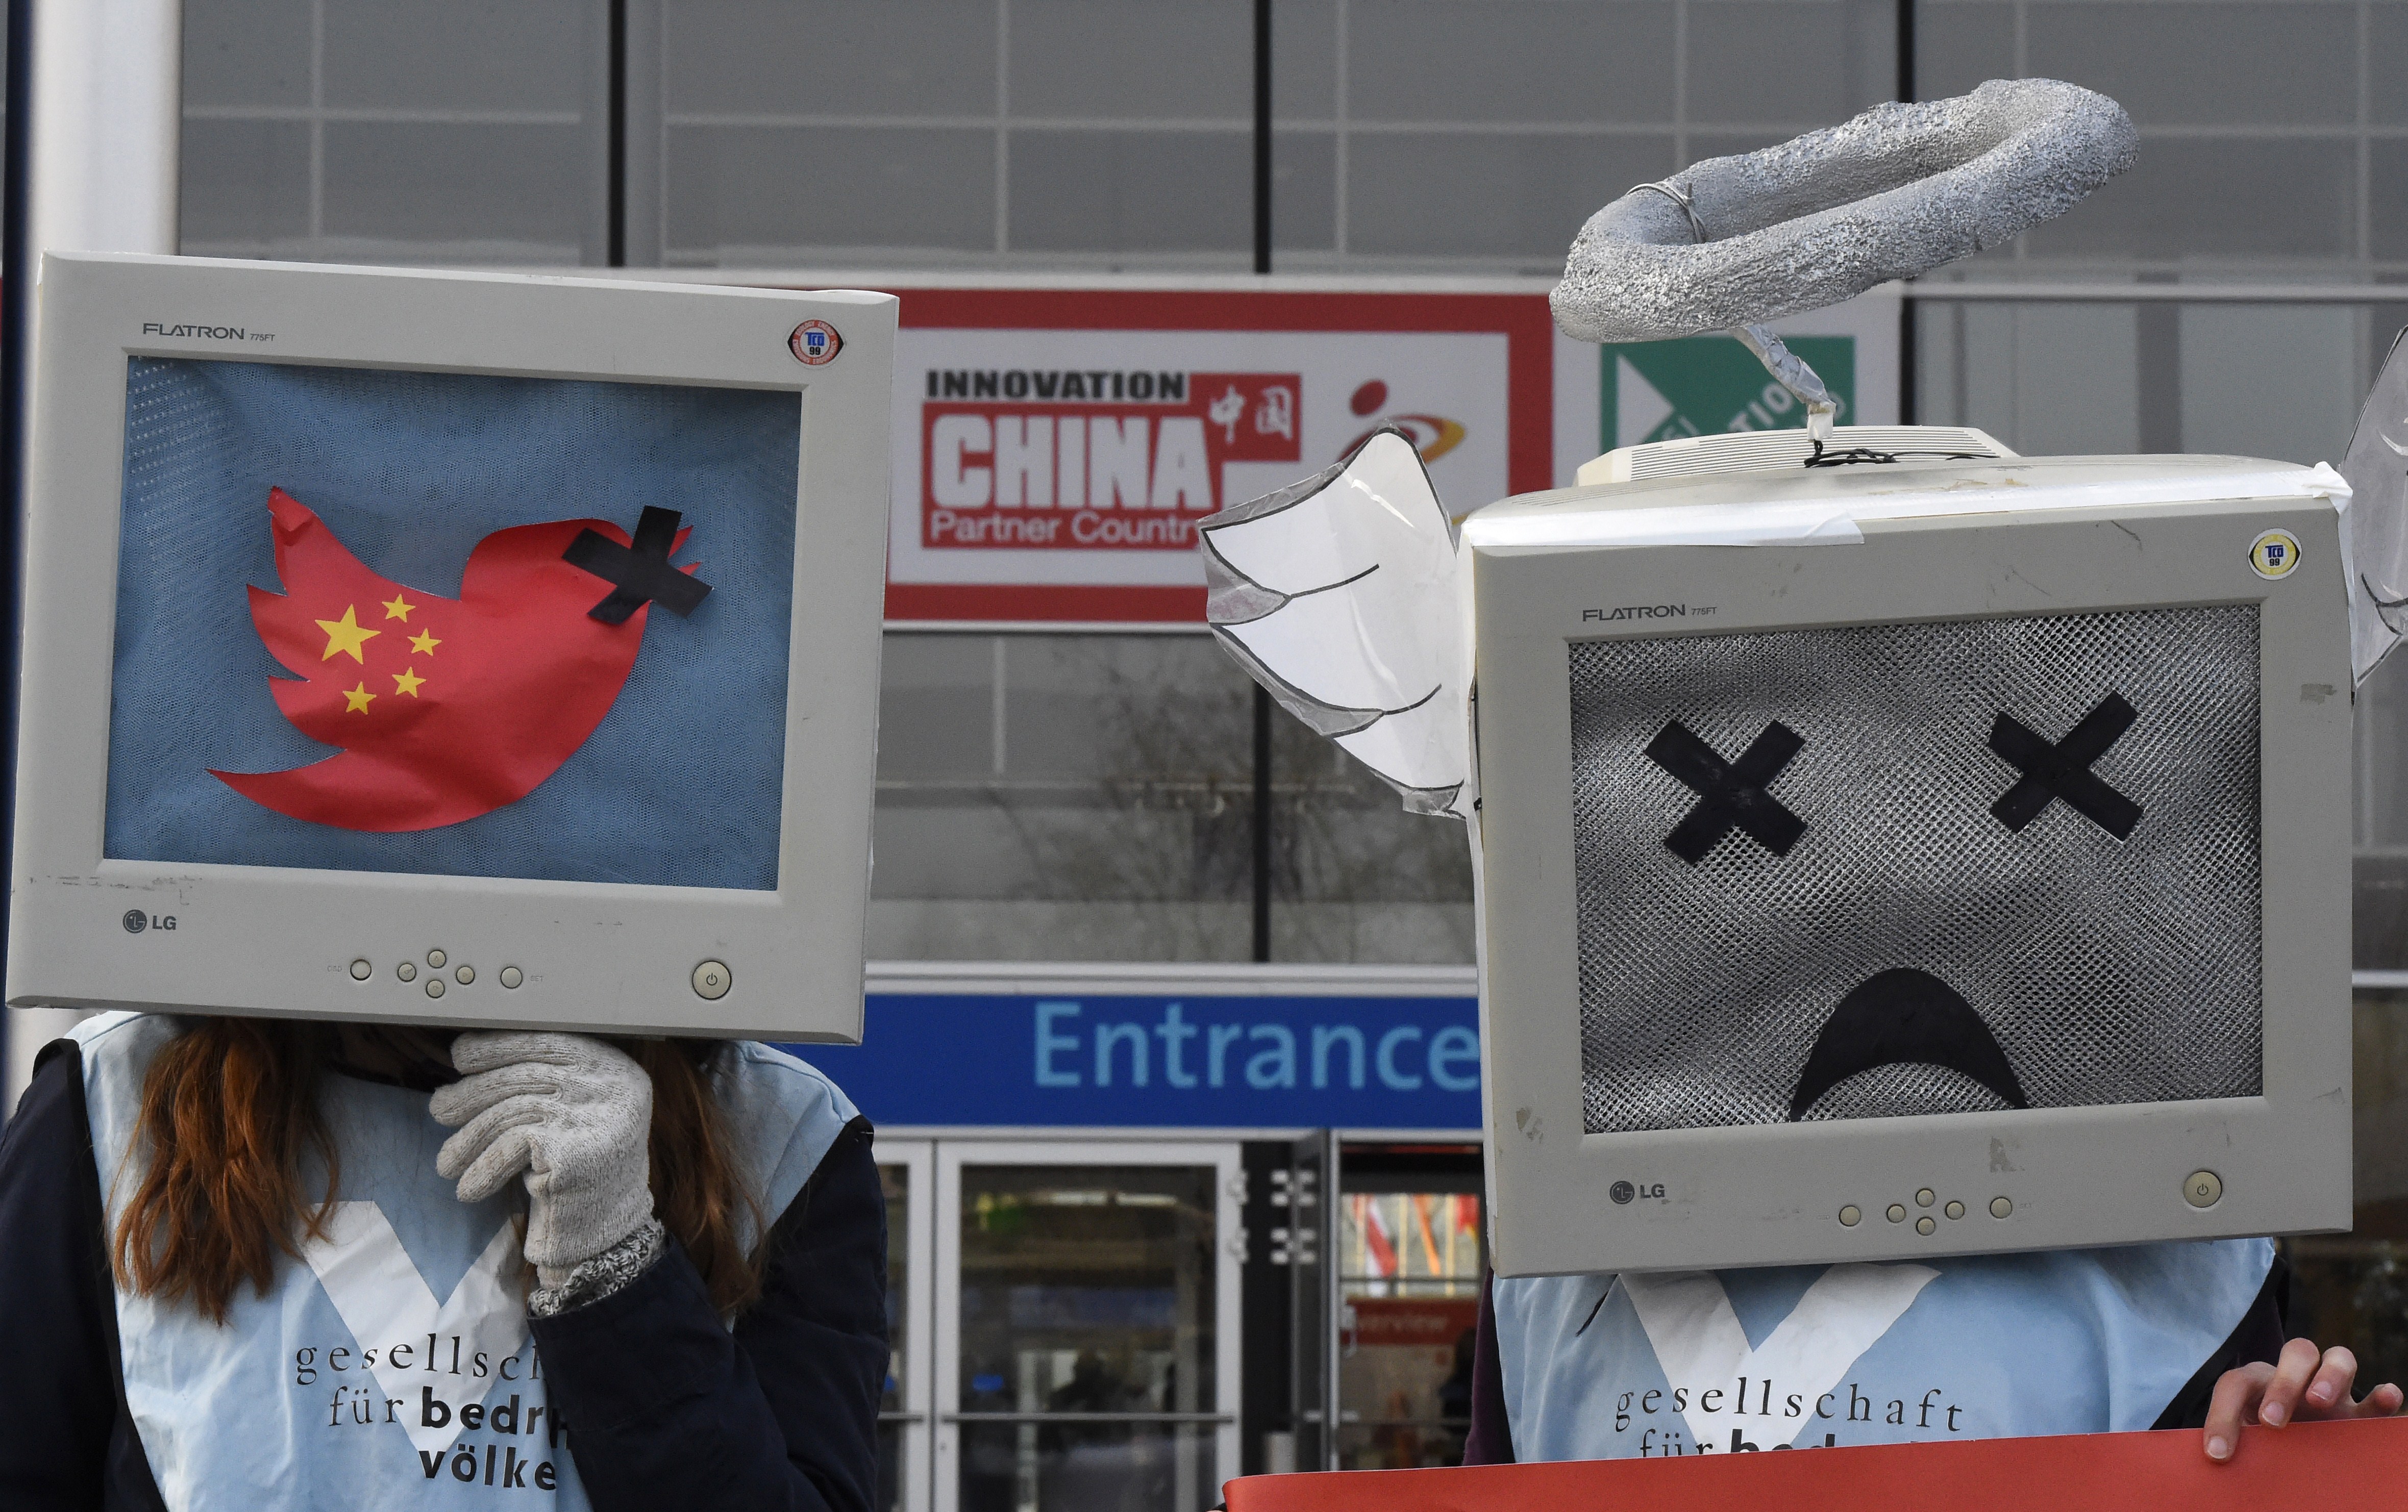 Demonstrators protest for freedom of opinion in China during the opening day of the CeBIT technology fair in Hanover, central Germany, on March 16, 2015 (TOBIAS SCHWARZ—AFP/Getty Images)